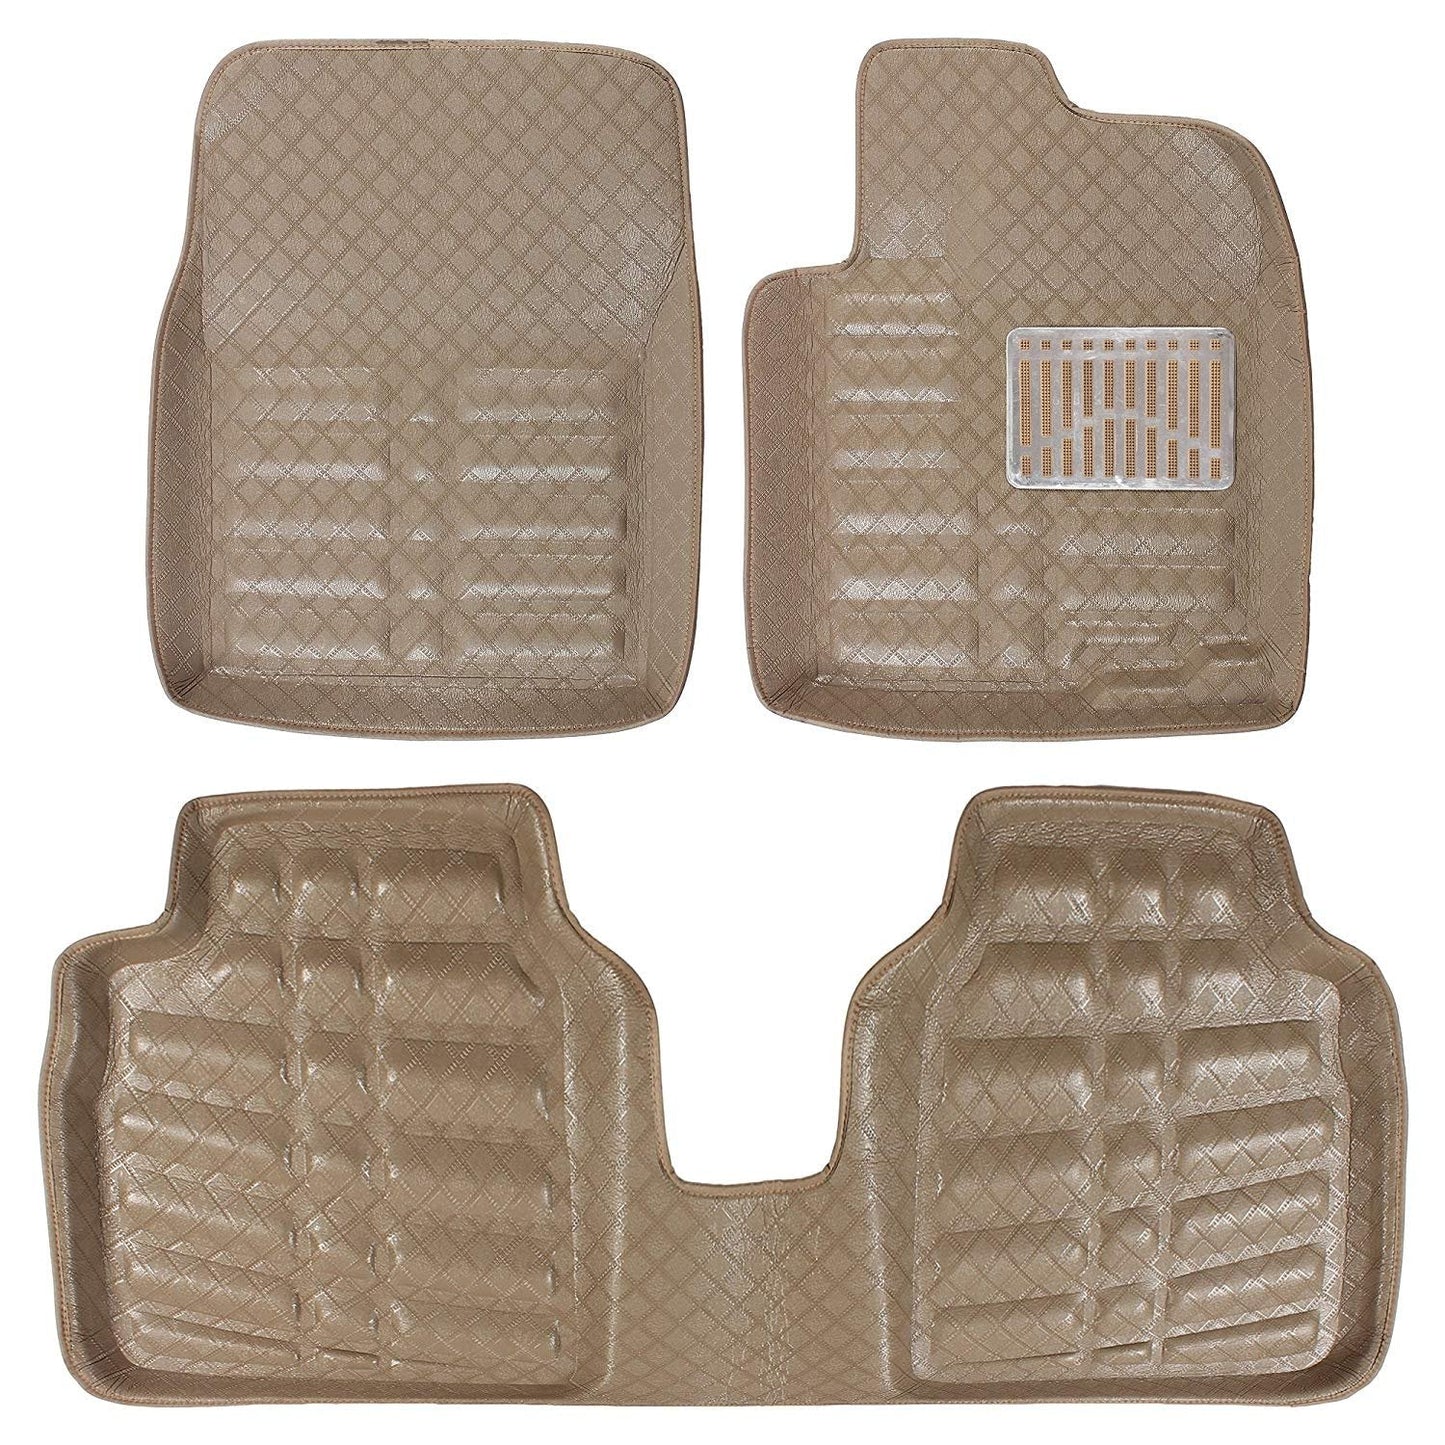 Oshotto 4D Artificial Leather Car Floor Mats For Hyundai Xcent - Set of 3 (2 pcs Front & one Long Single Rear pc) - Beige